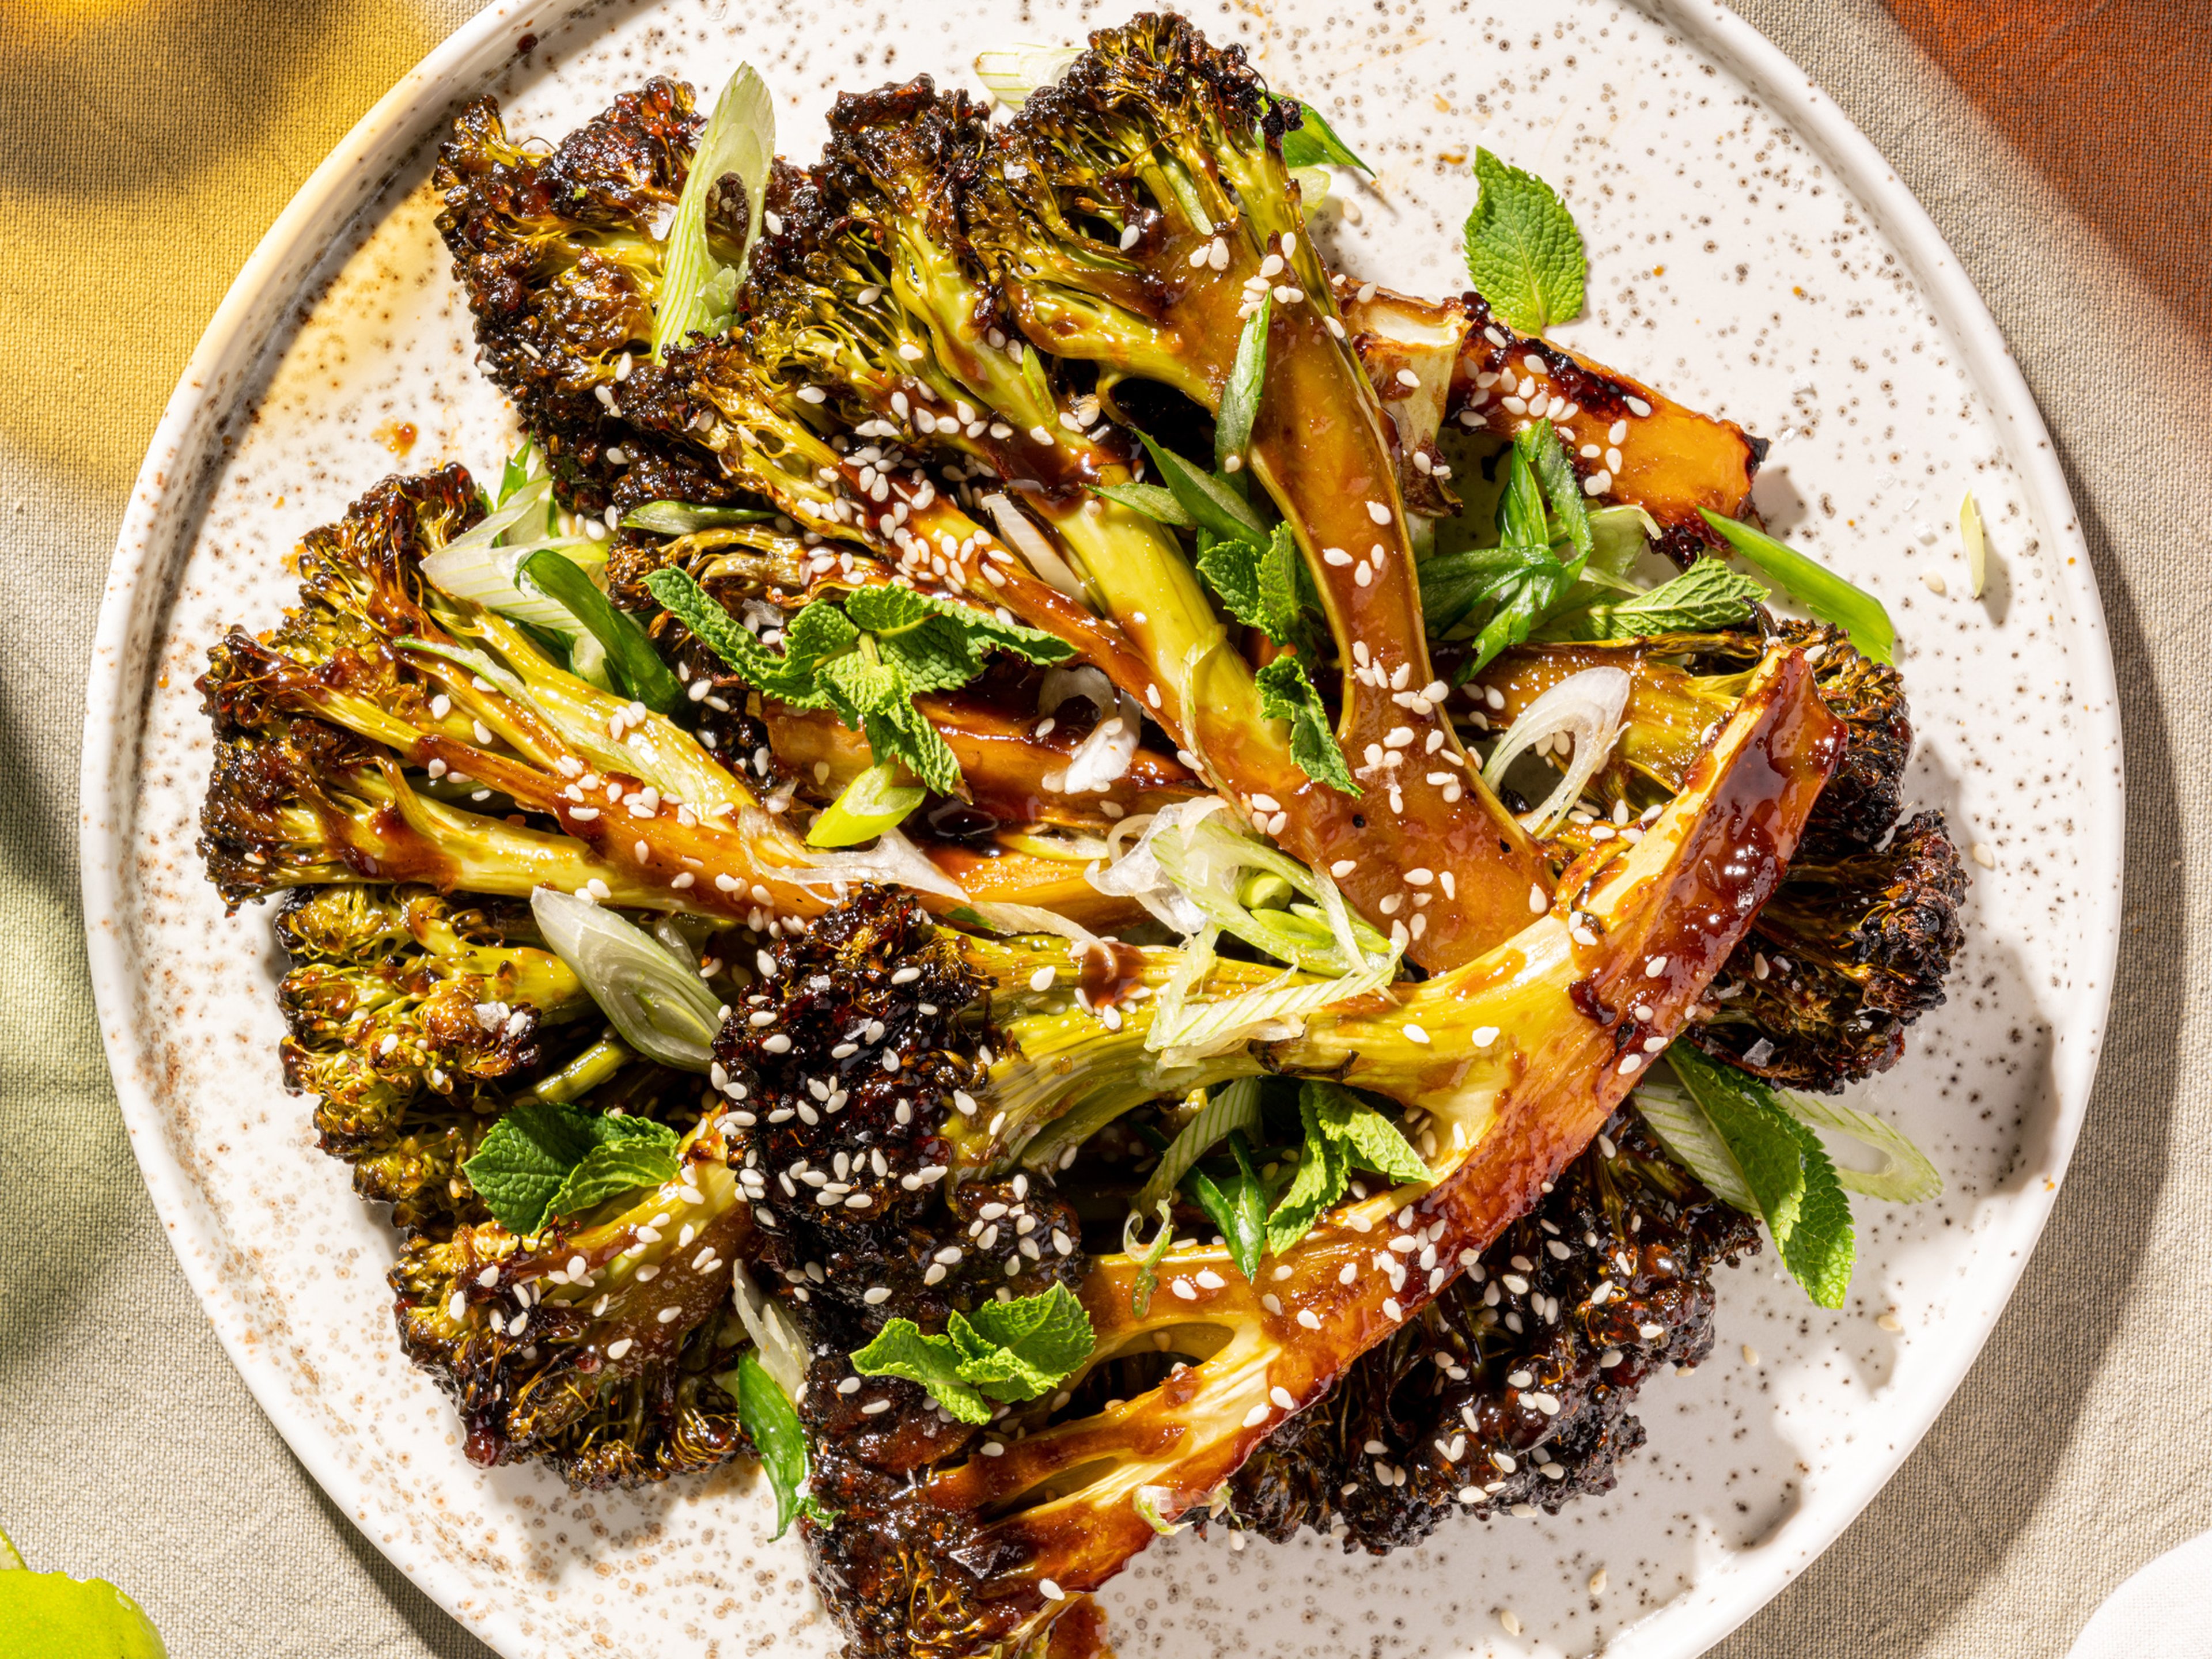 Thanks to Hoisin Sauce, Here's a Broccoli Recipe Everyone Will Love